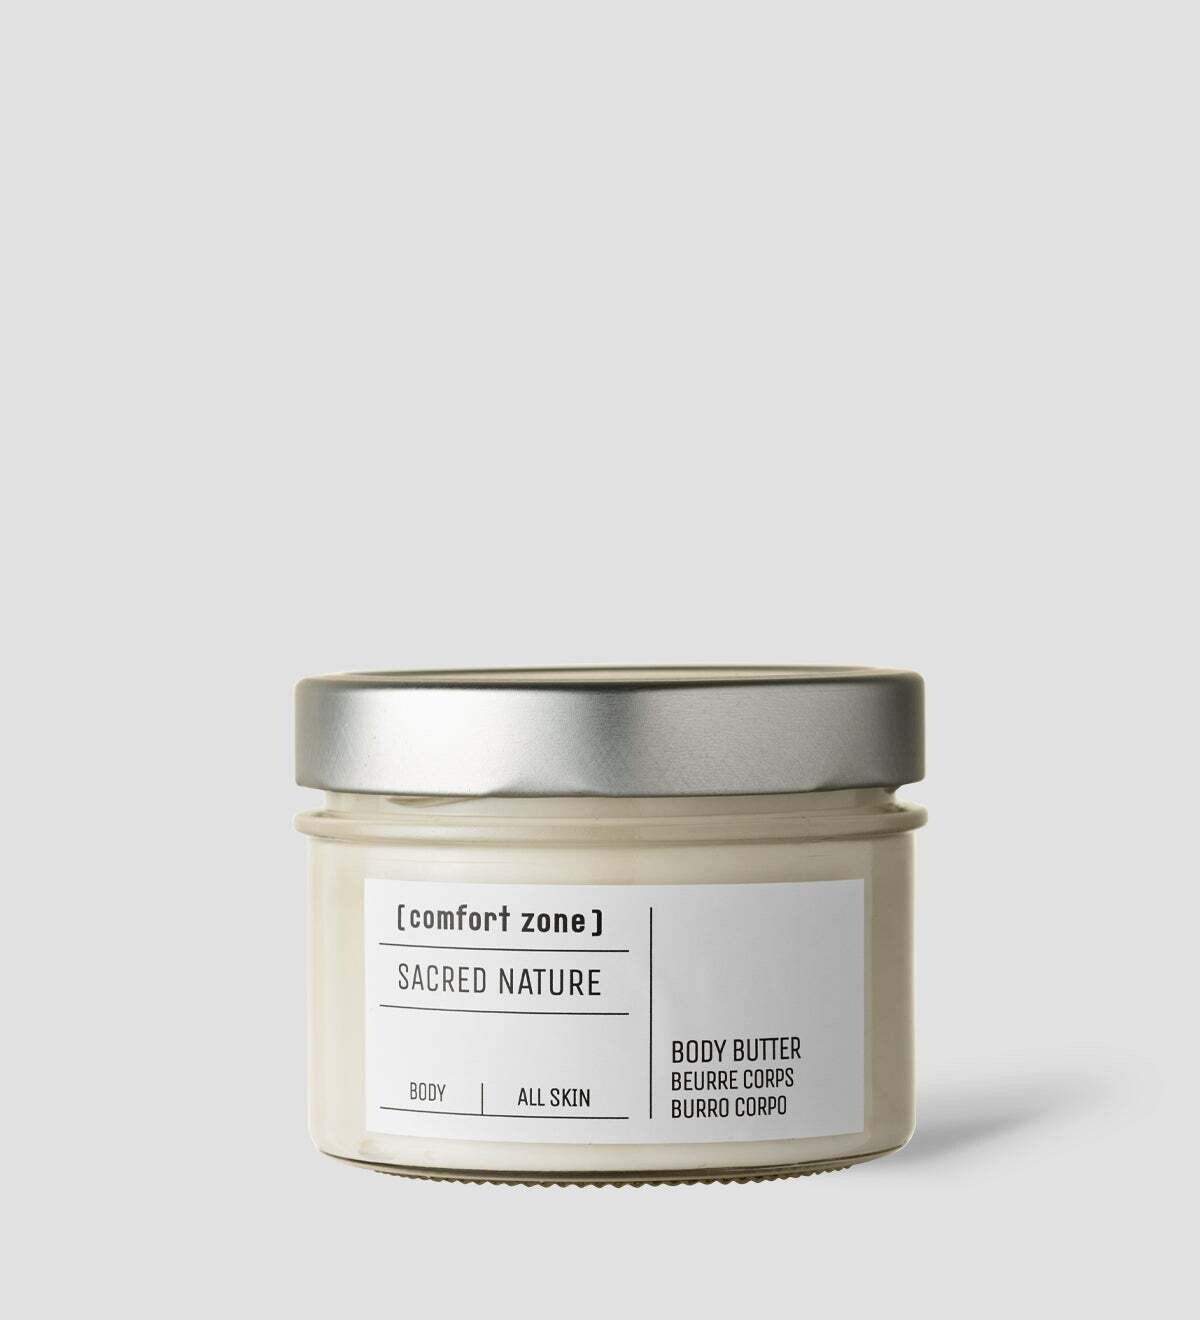 SACRED NATURE
BODY BUTTER 220 ml